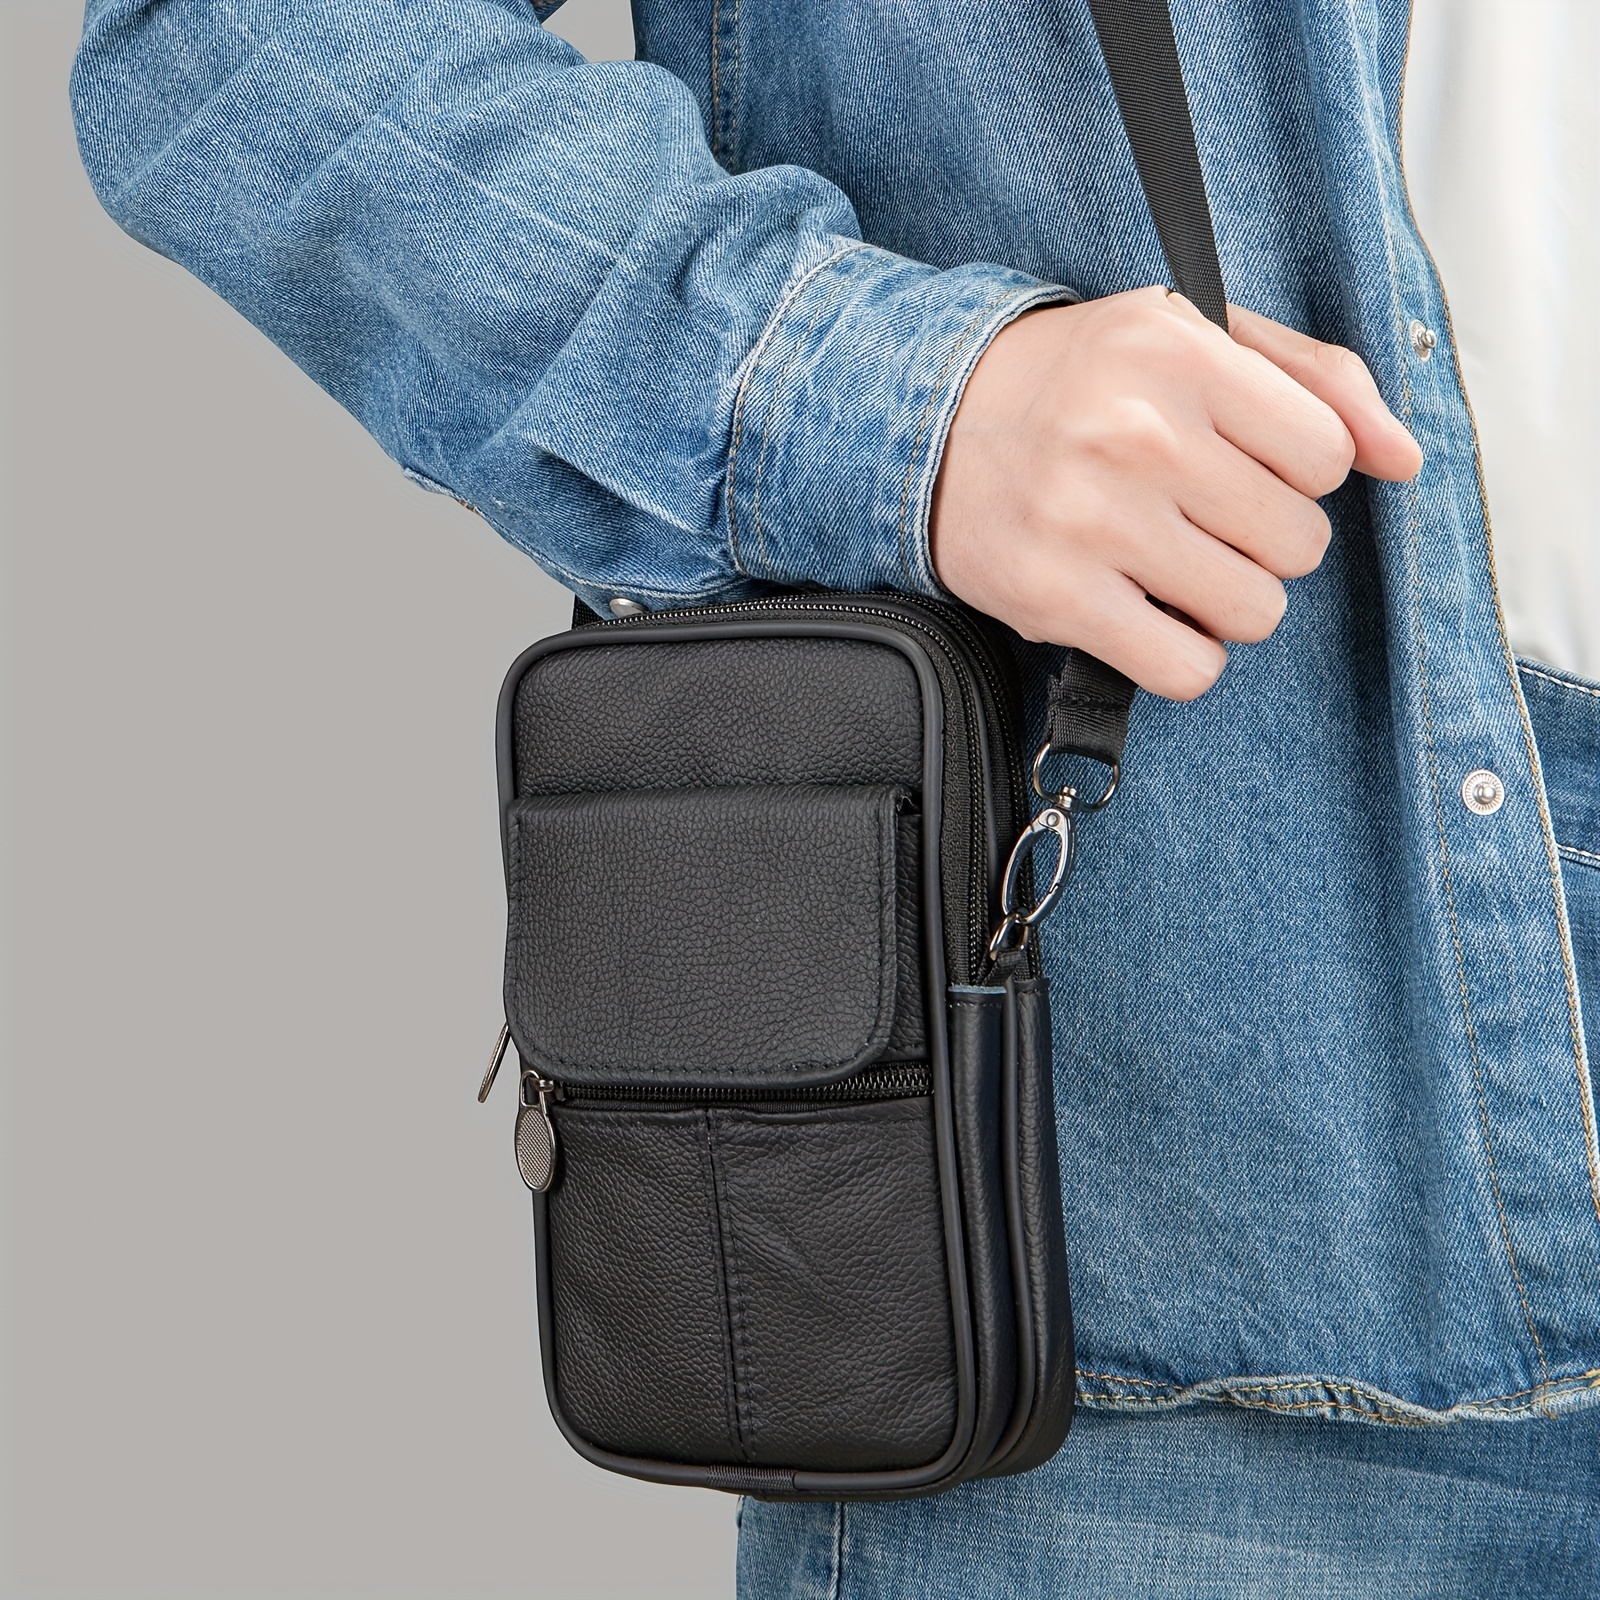 Men's Casual Sling Bag, Shoulder Bag, Mobile Phone Pouch, Multifunctional  Mobile Phone Pouch for Couples